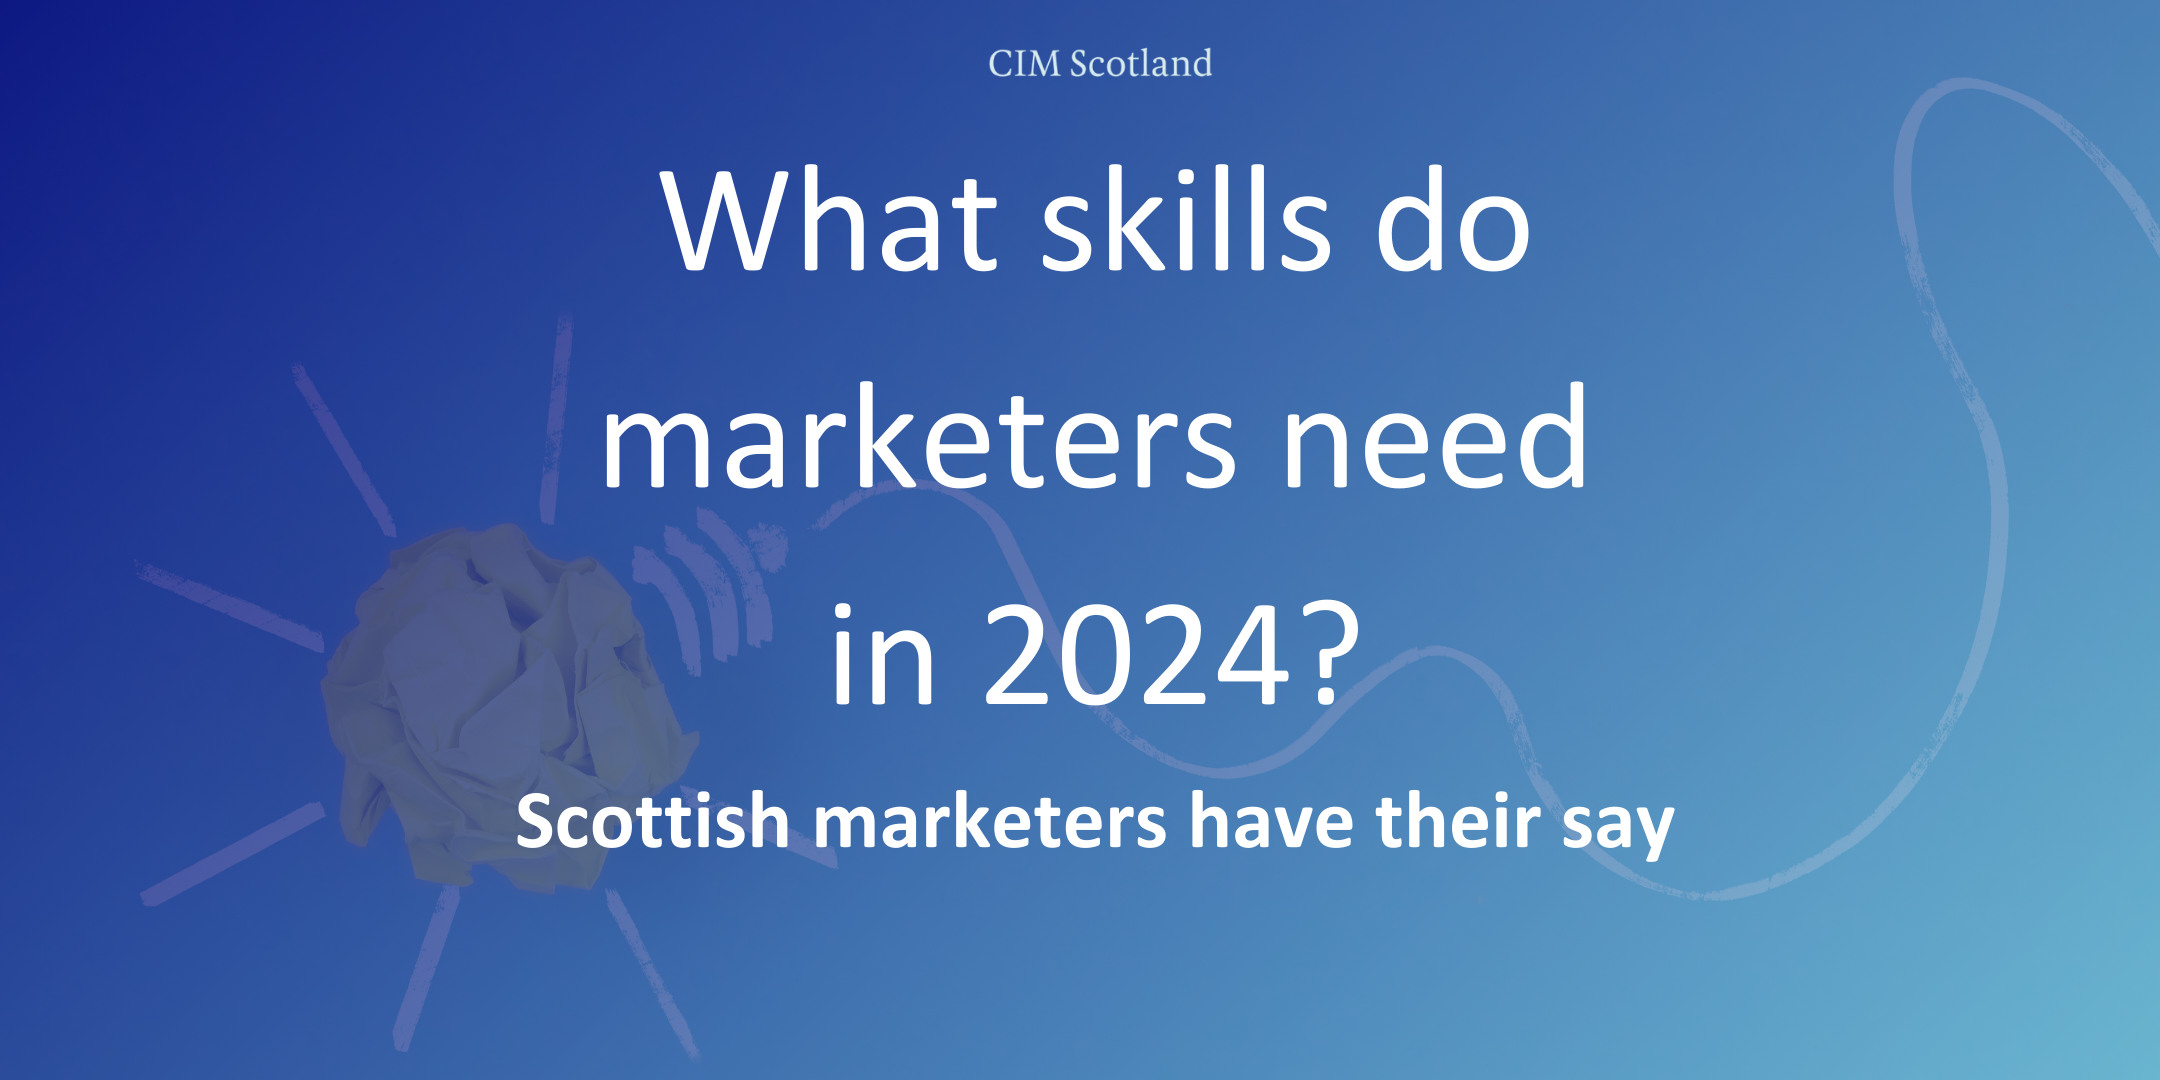 What skills do marketers most need in 2024?